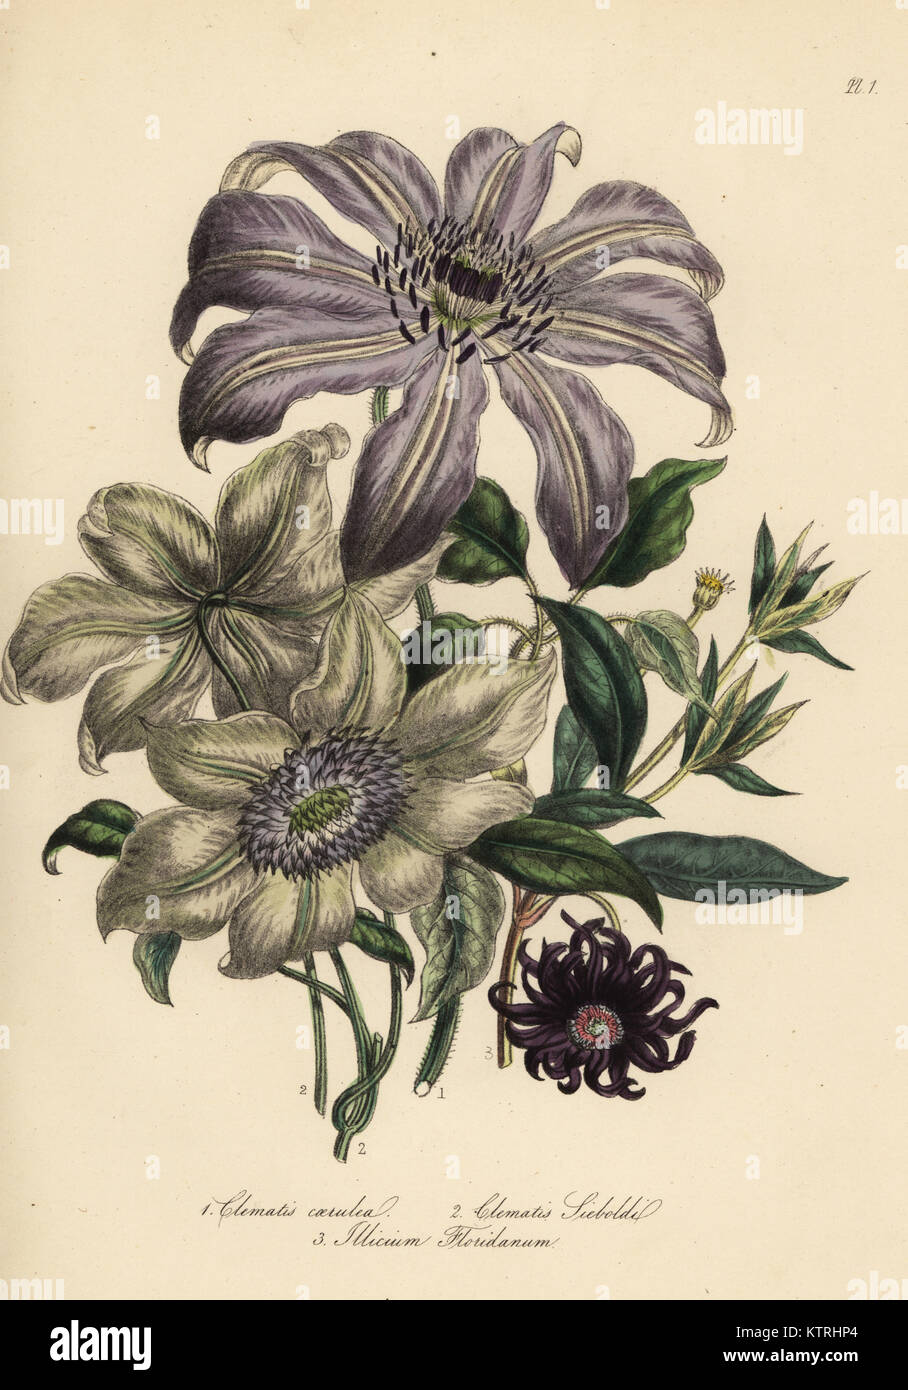 Clematis varieties: blue clematis, Clematis caerulea, many-flowered clematis, Clematis sieboldii, and Florida aniseed clematis, Illicium floridanum. Handfinished chromolithograph by Noel Humphreys after an illustration by Jane Loudon from Mrs. Jane Loudon's Ladies Flower Garden or Ornamental Greenhouse Plants, William S. Orr, London, 1849. Stock Photo